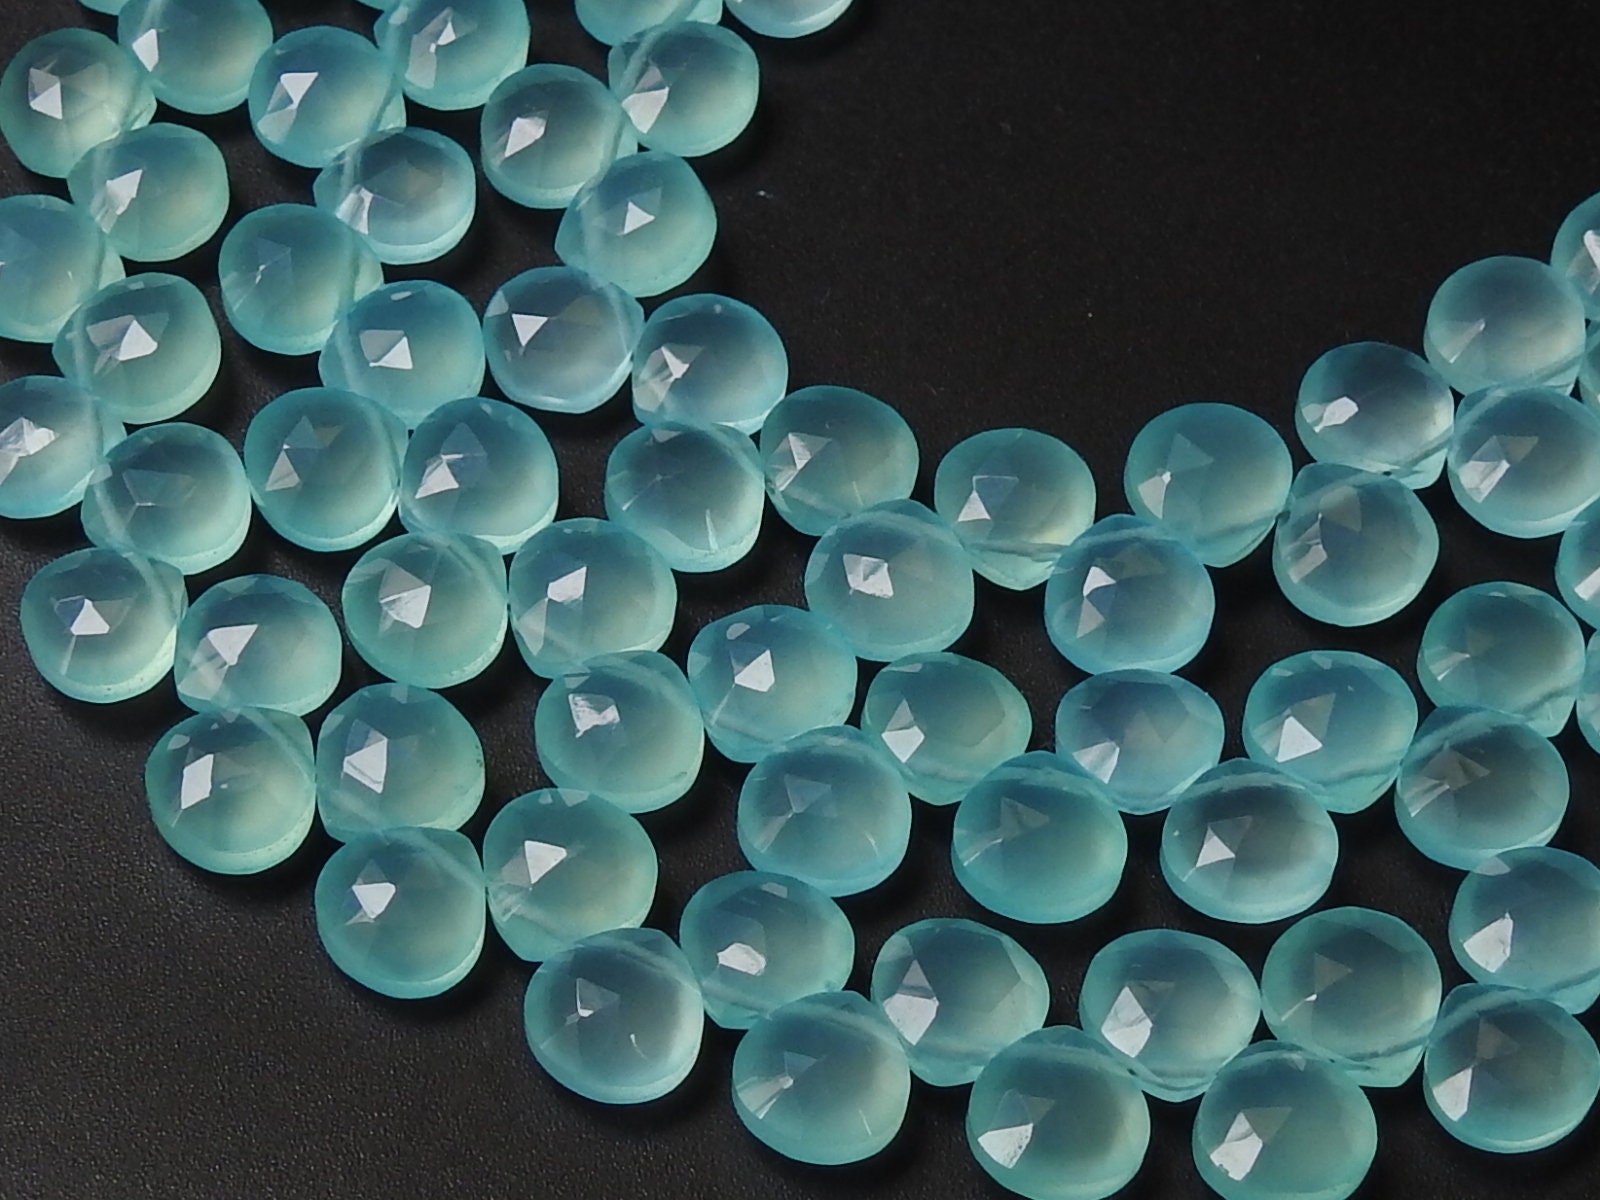 Aqua Blue Chalcedony Faceted Hearts,Teardrop,Drop,Loose Stone,Handmade,Earrings Pair,For Making Jewelry 4Inch Strand 8X8 MM Approx (pme)CY2 | Save 33% - Rajasthan Living 17